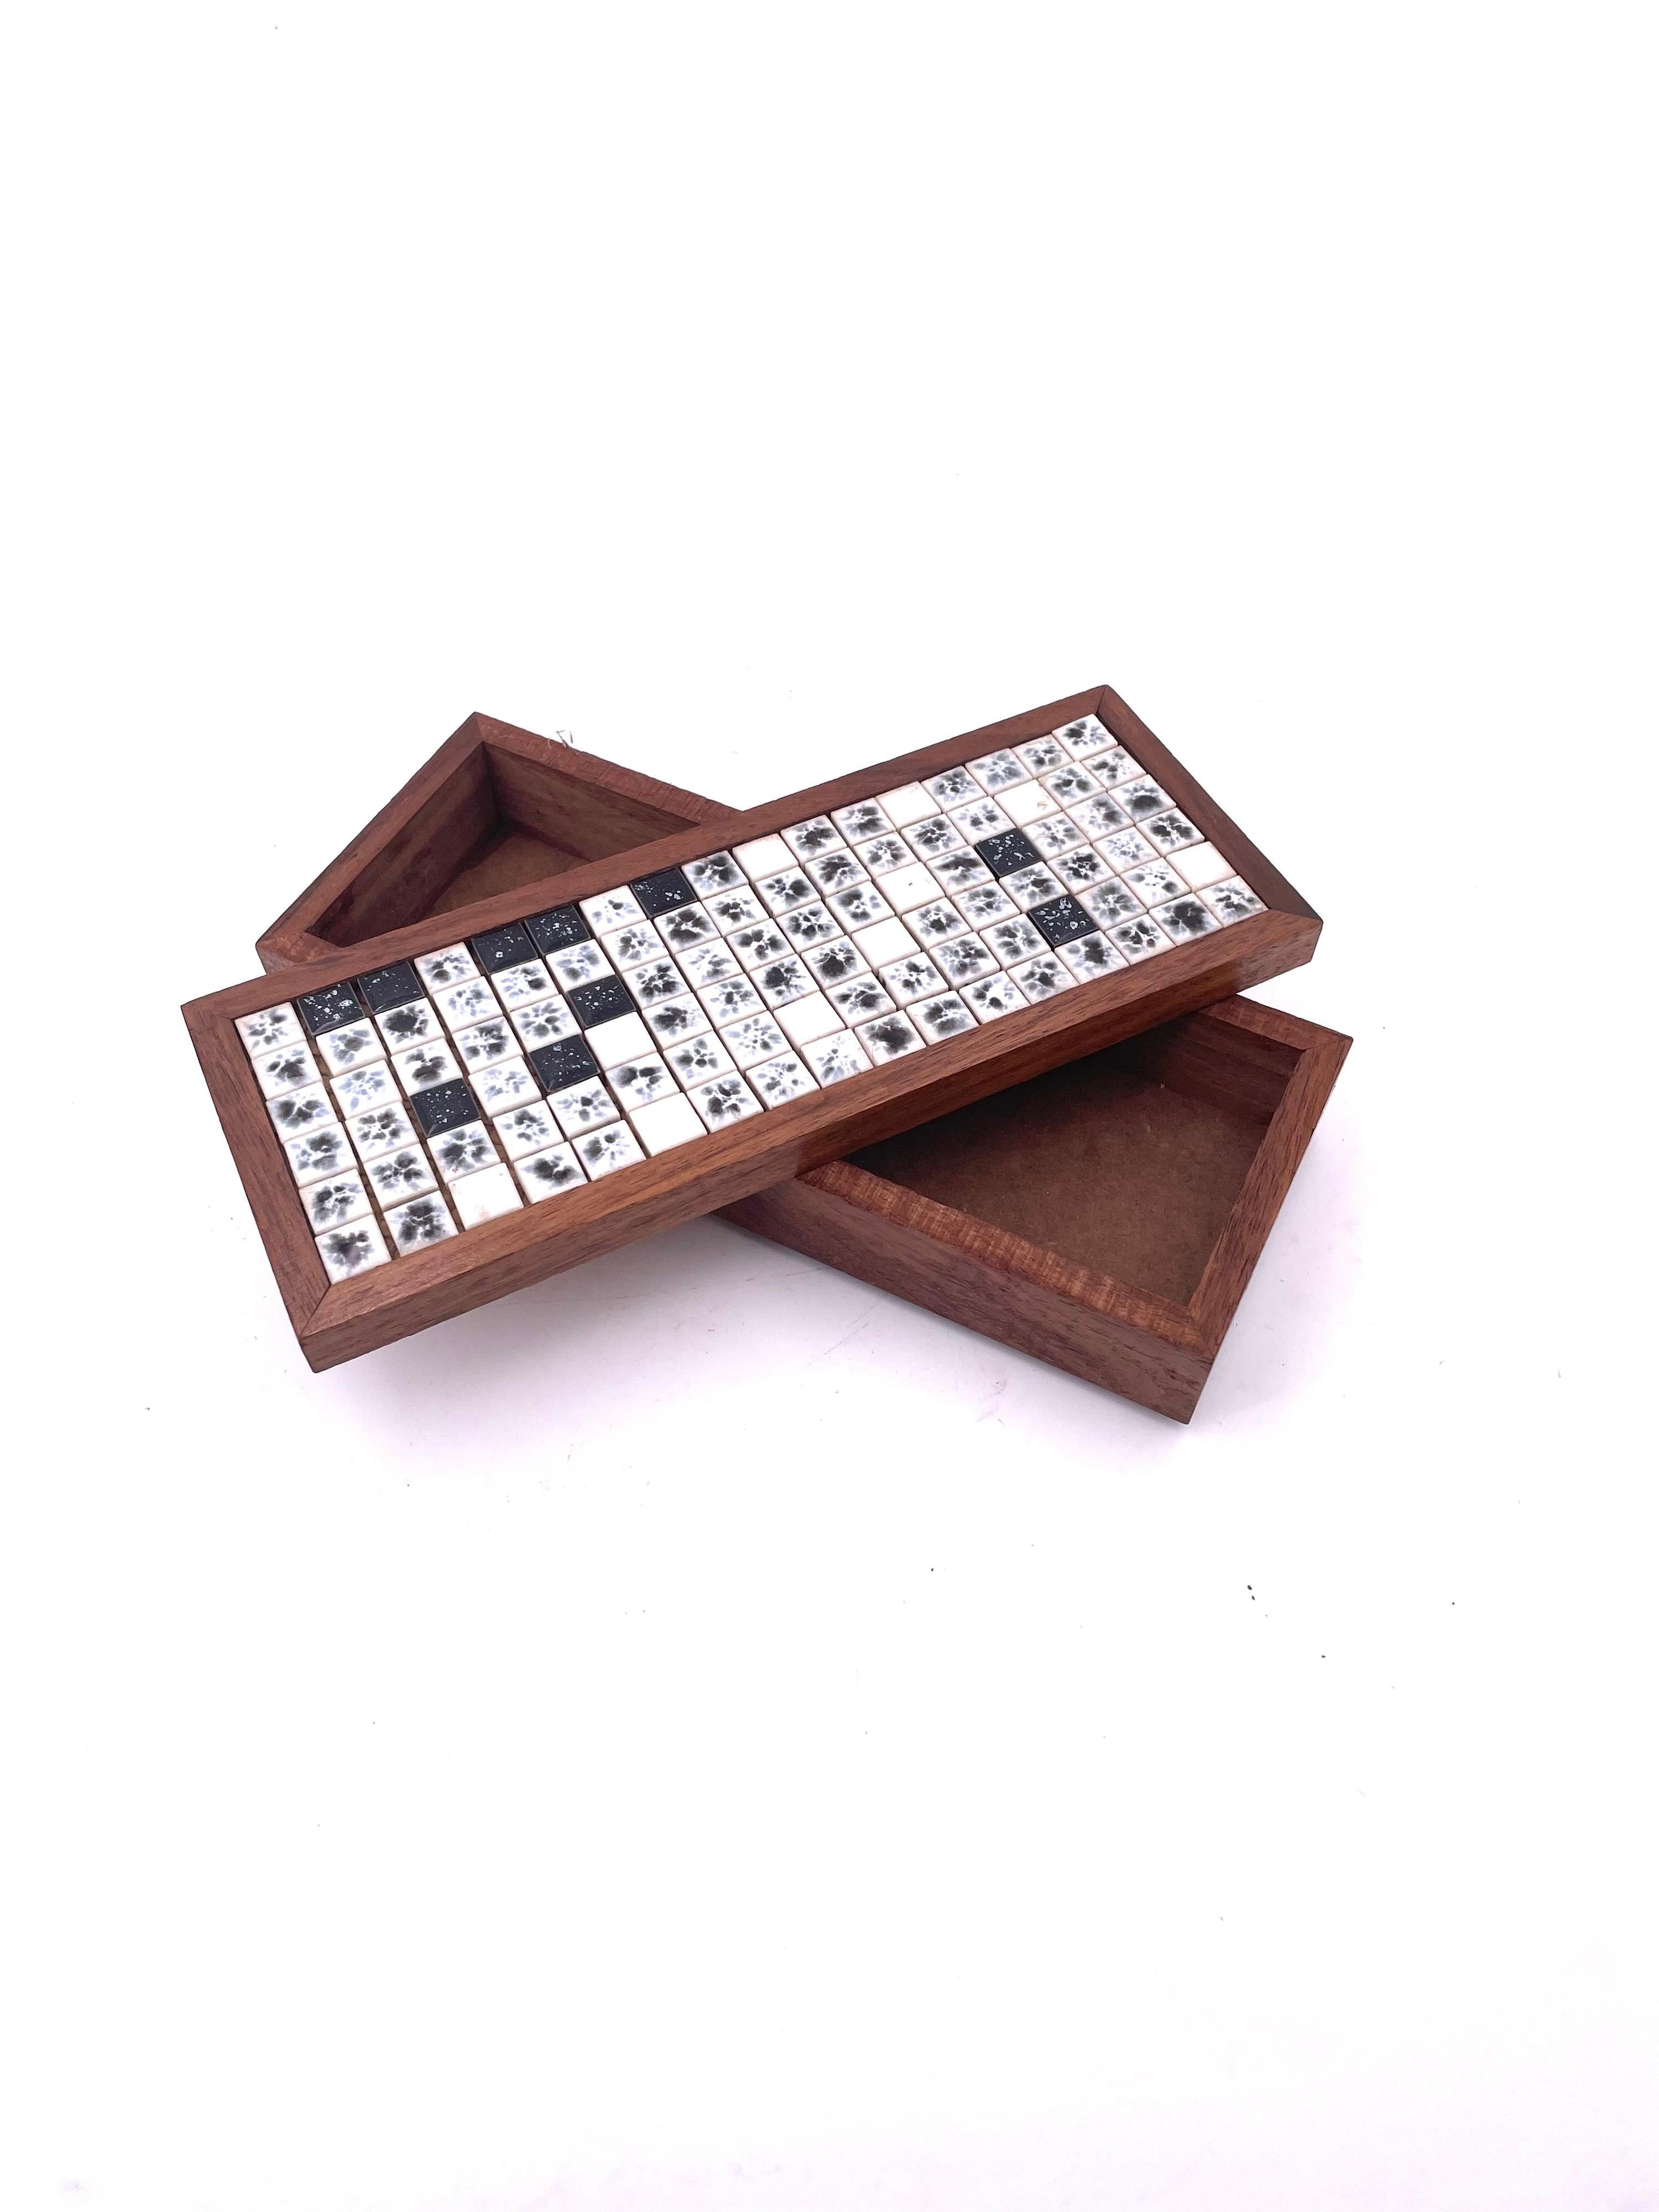 a jewelry box company offers simple jewelry boxes with decorative tiles